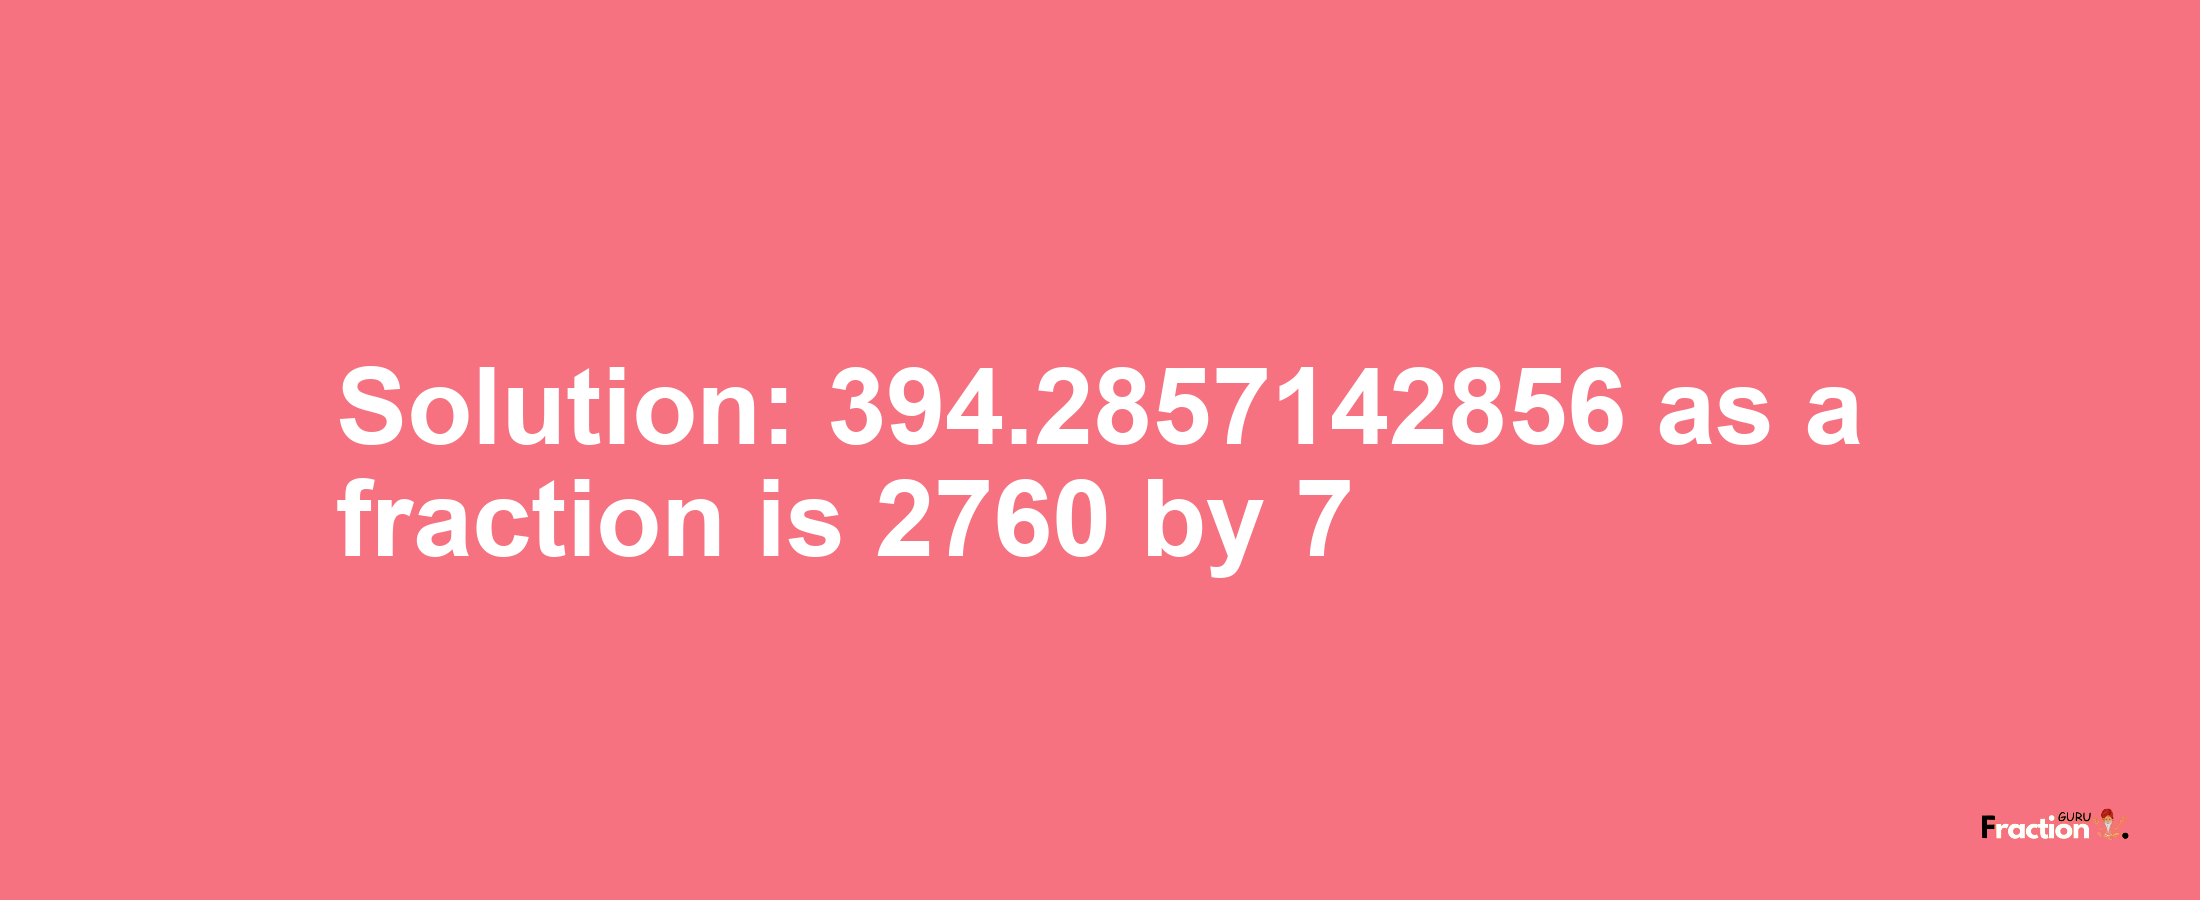 Solution:394.2857142856 as a fraction is 2760/7